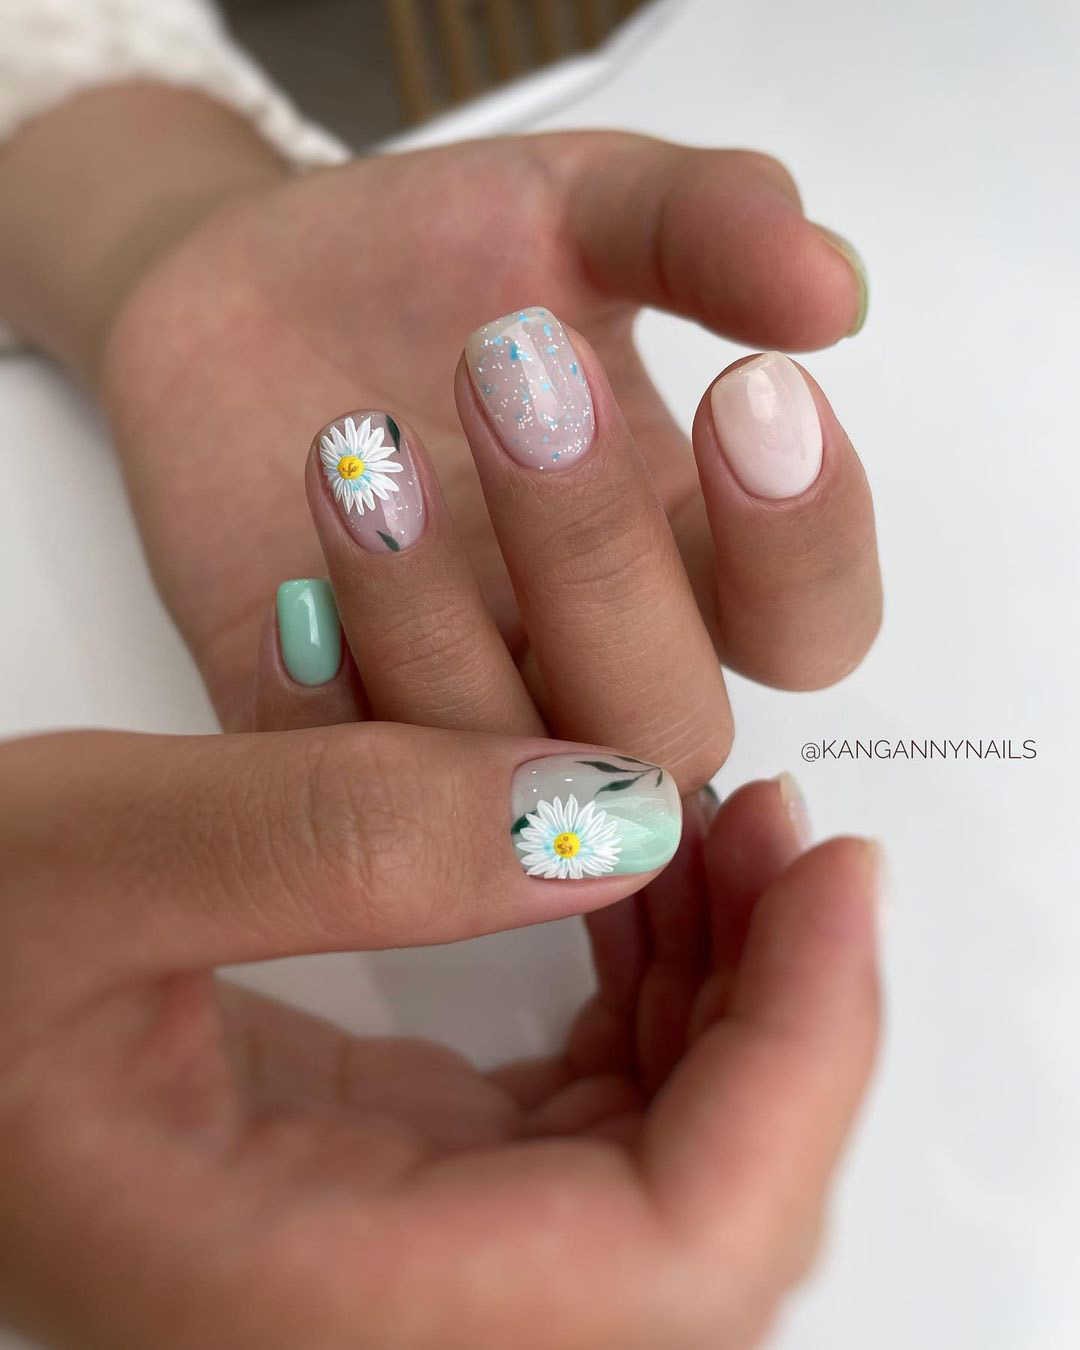 nude wedding nails with painted white flowers kangannynails